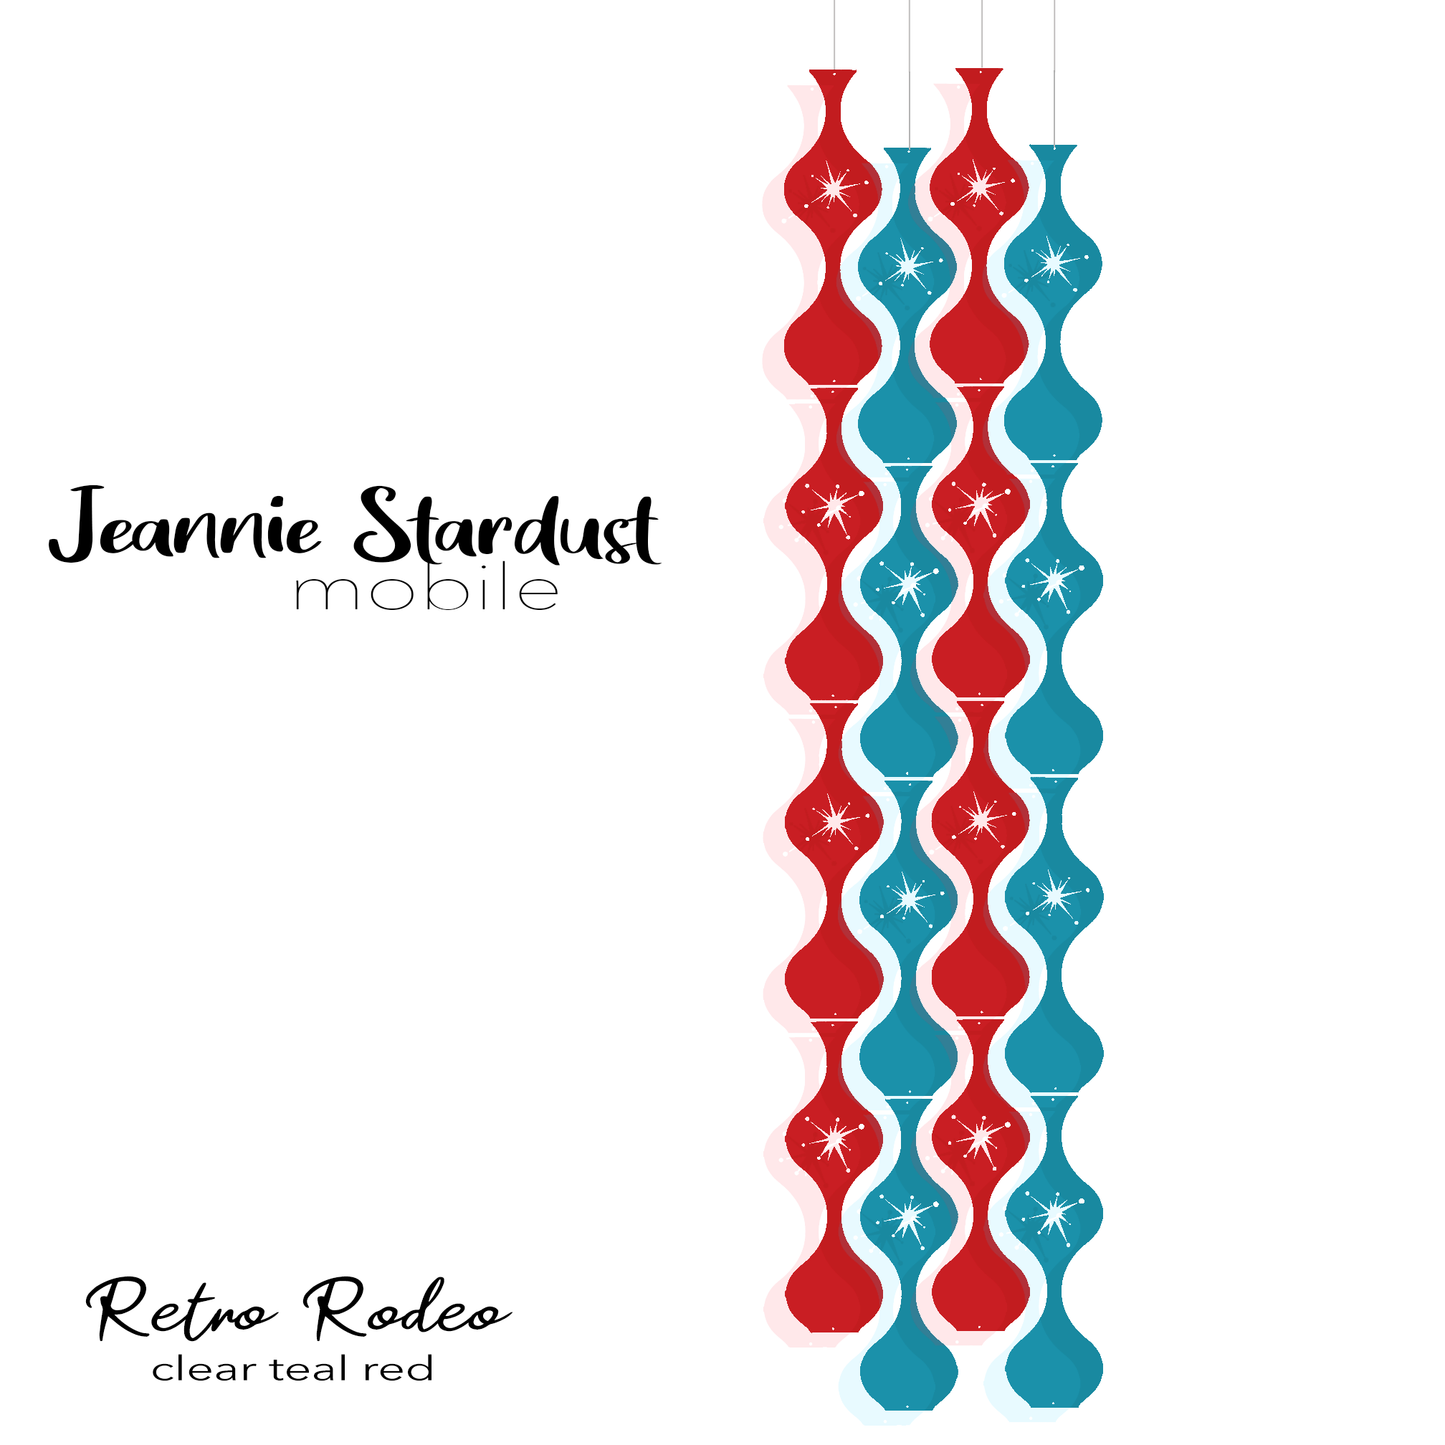  Jeannie Stardust Retro Rodeo - Clear ruby red and teal plexiglass acrylic hanging art mobiles in mid century modern style for home decor by AtomicMobiles.com